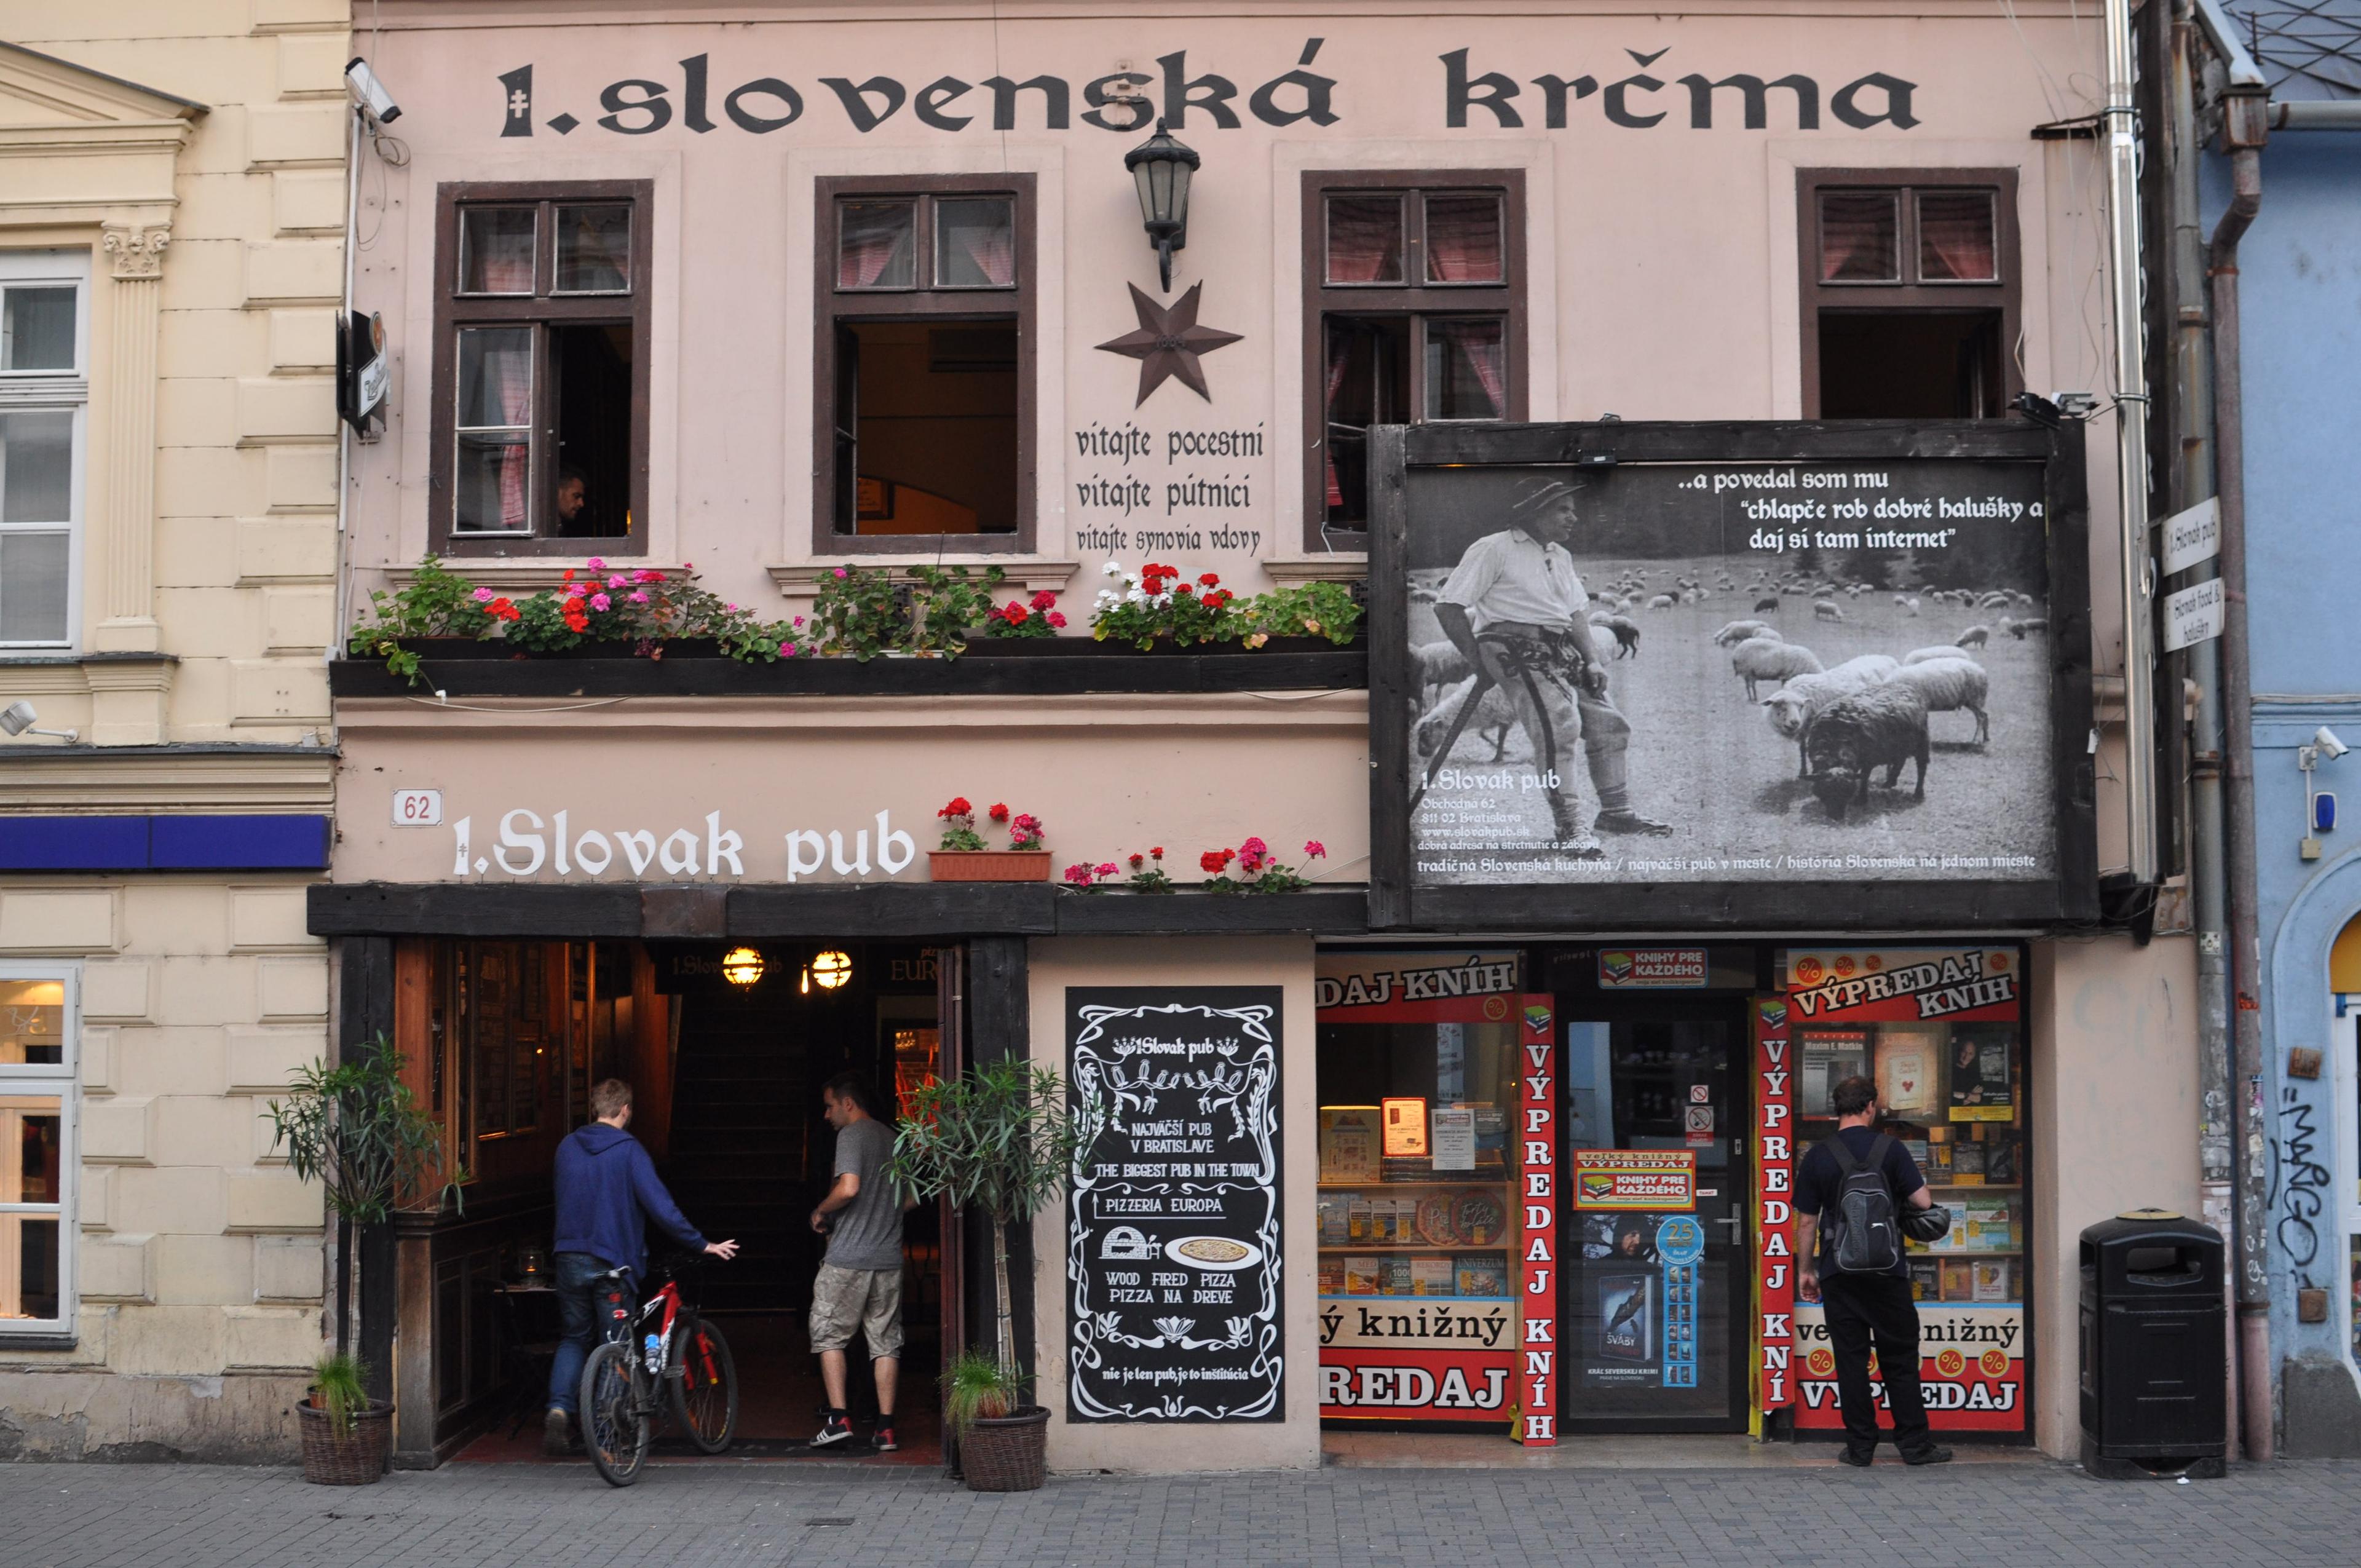 Cover image of this place 1. Slovak pub